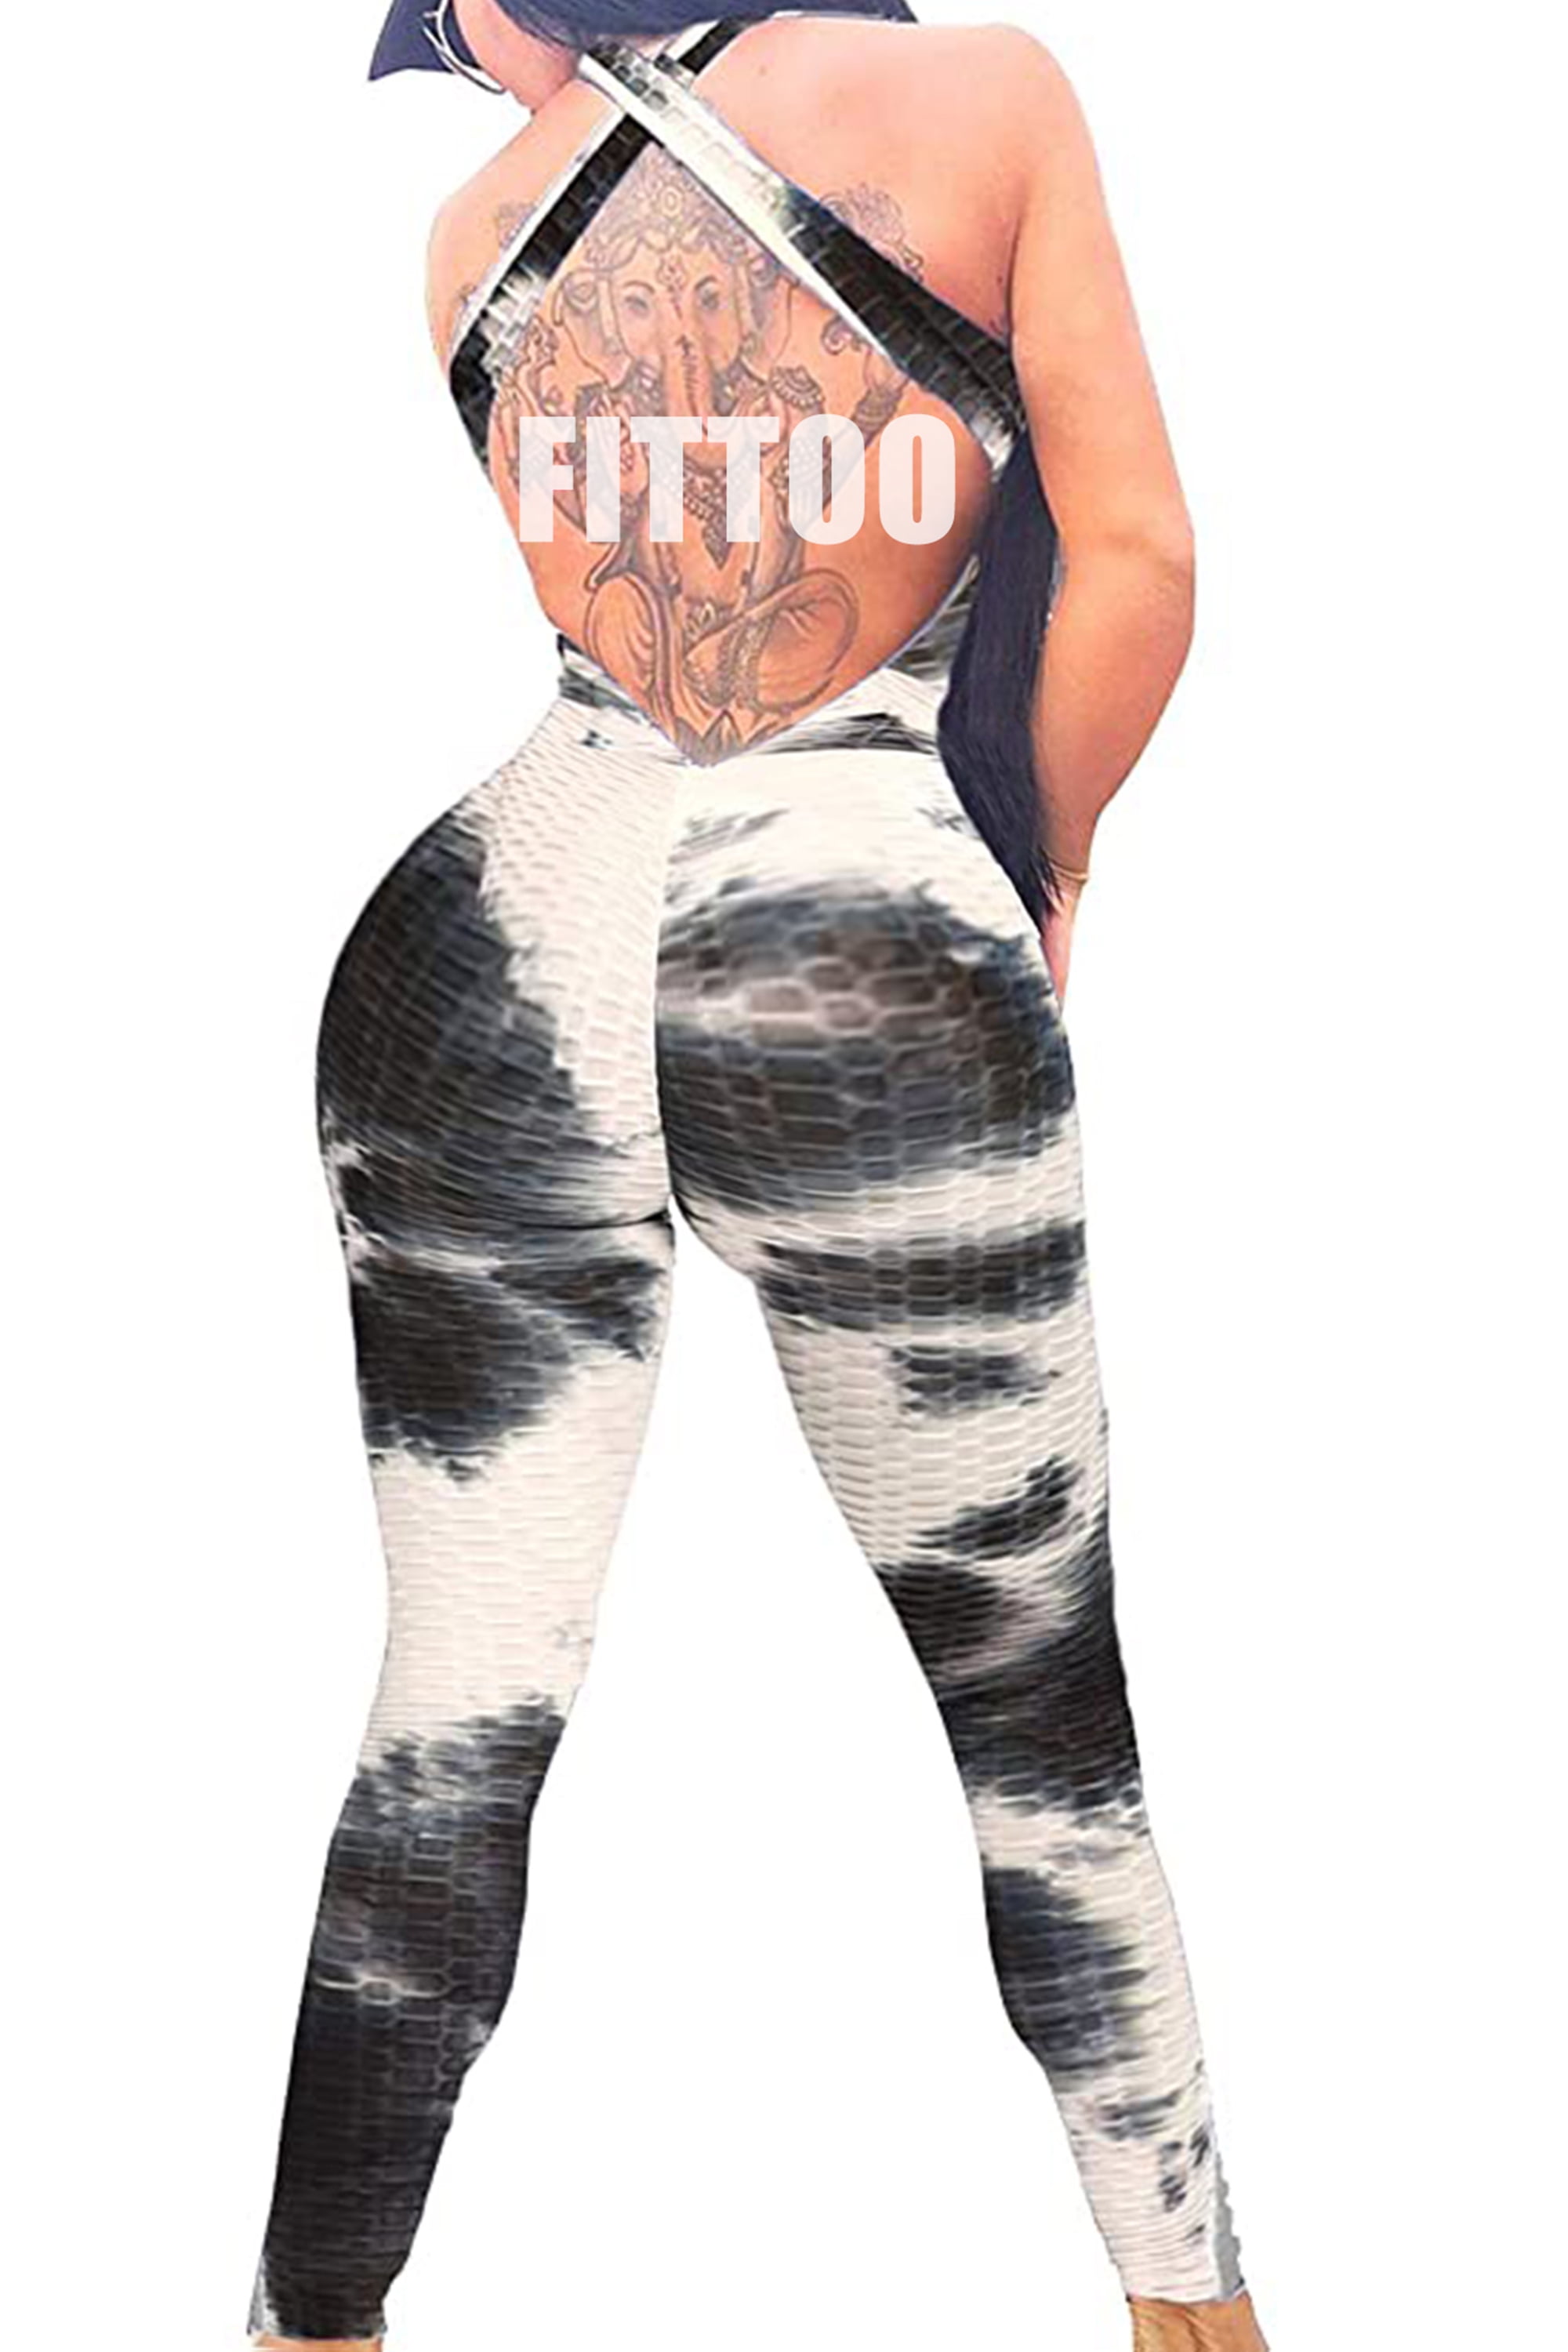 FITTOO Women Ruched Butt Lift Texture Bodysuit Yoga Fitness